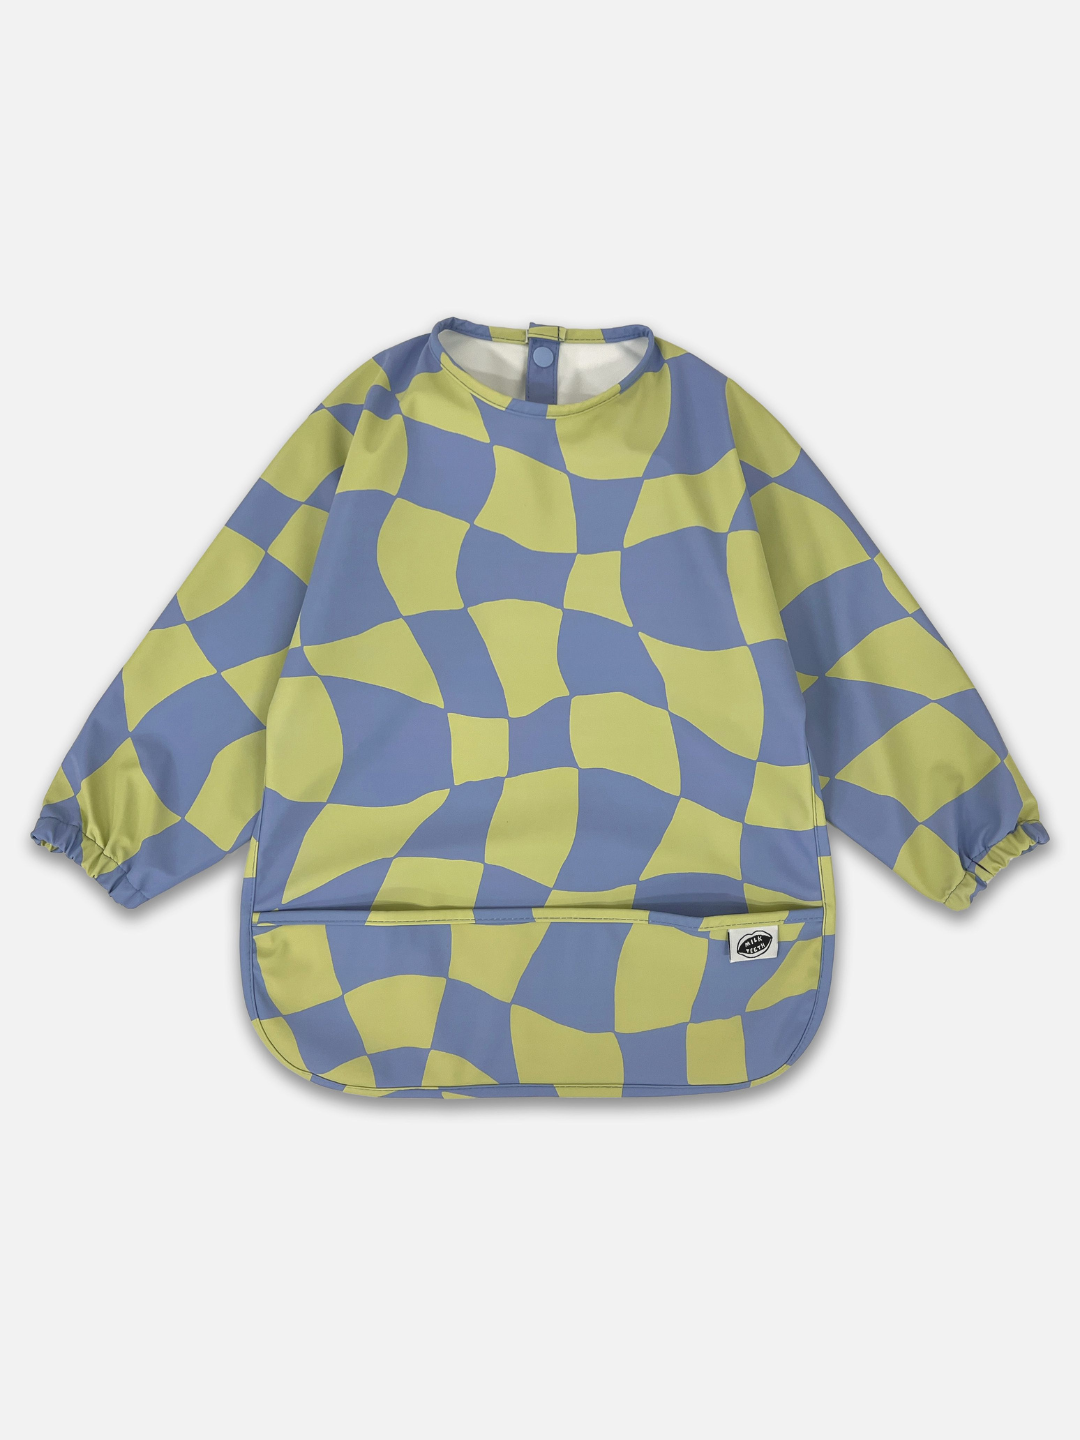 A front view  of the long sleeve light green and blue wavy checked bib with a front pocket.